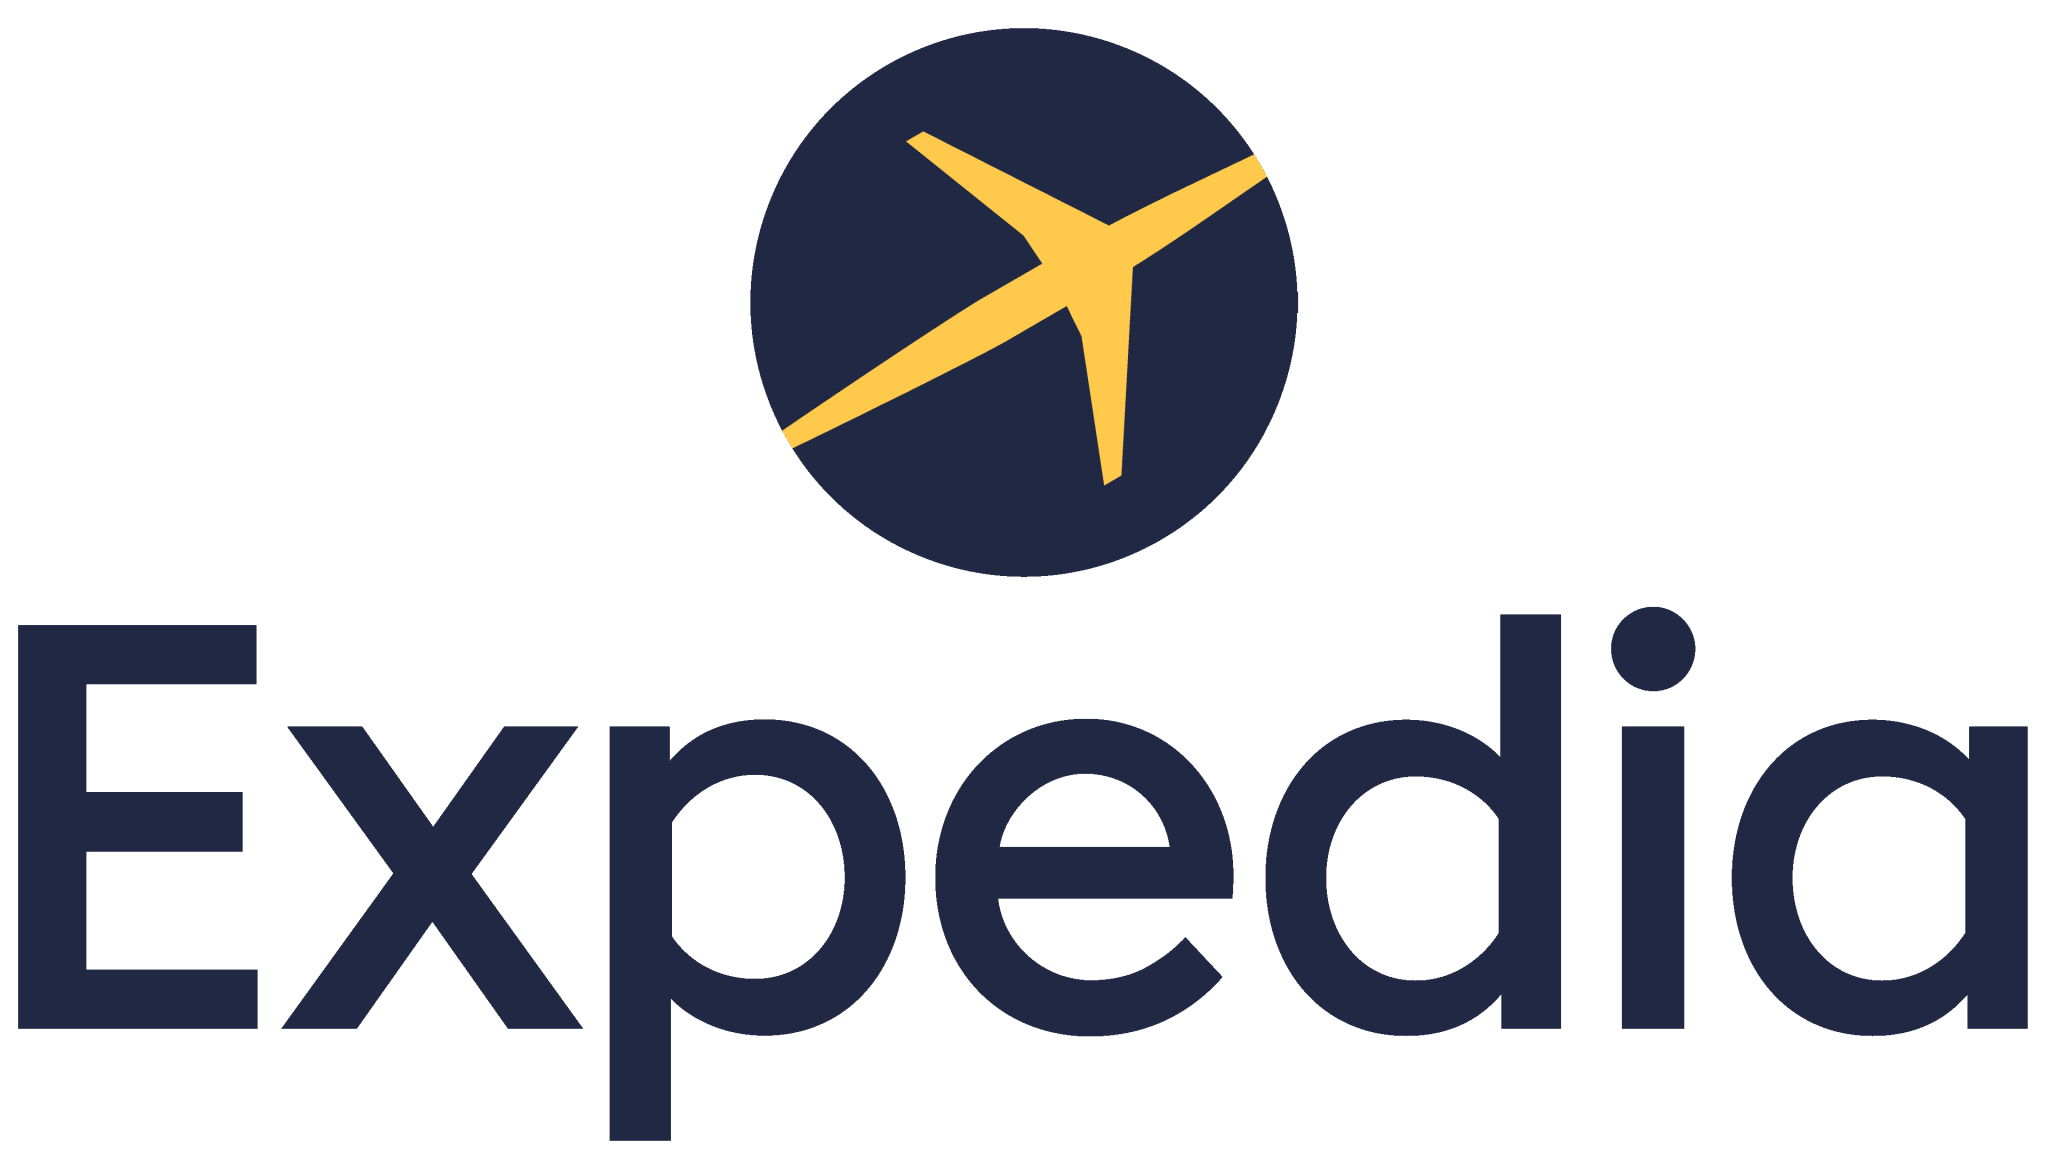 expedia online travel services india private limited